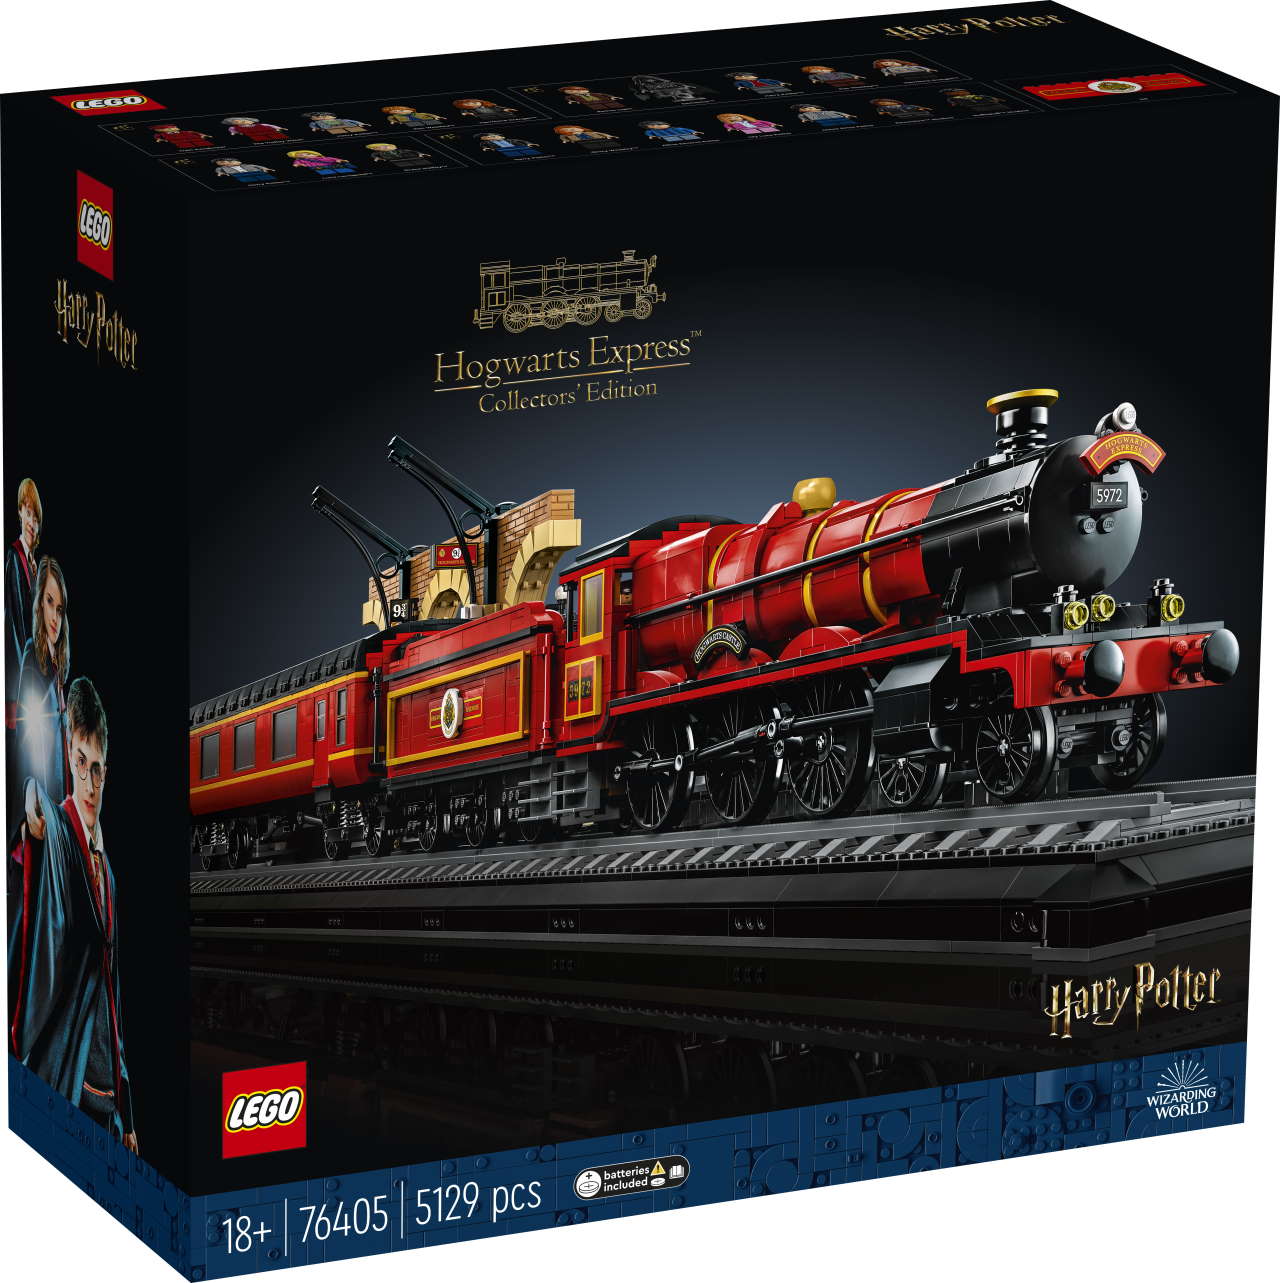 New LEGO Harry Potter Hogwarts Express set released along with a competition for fans